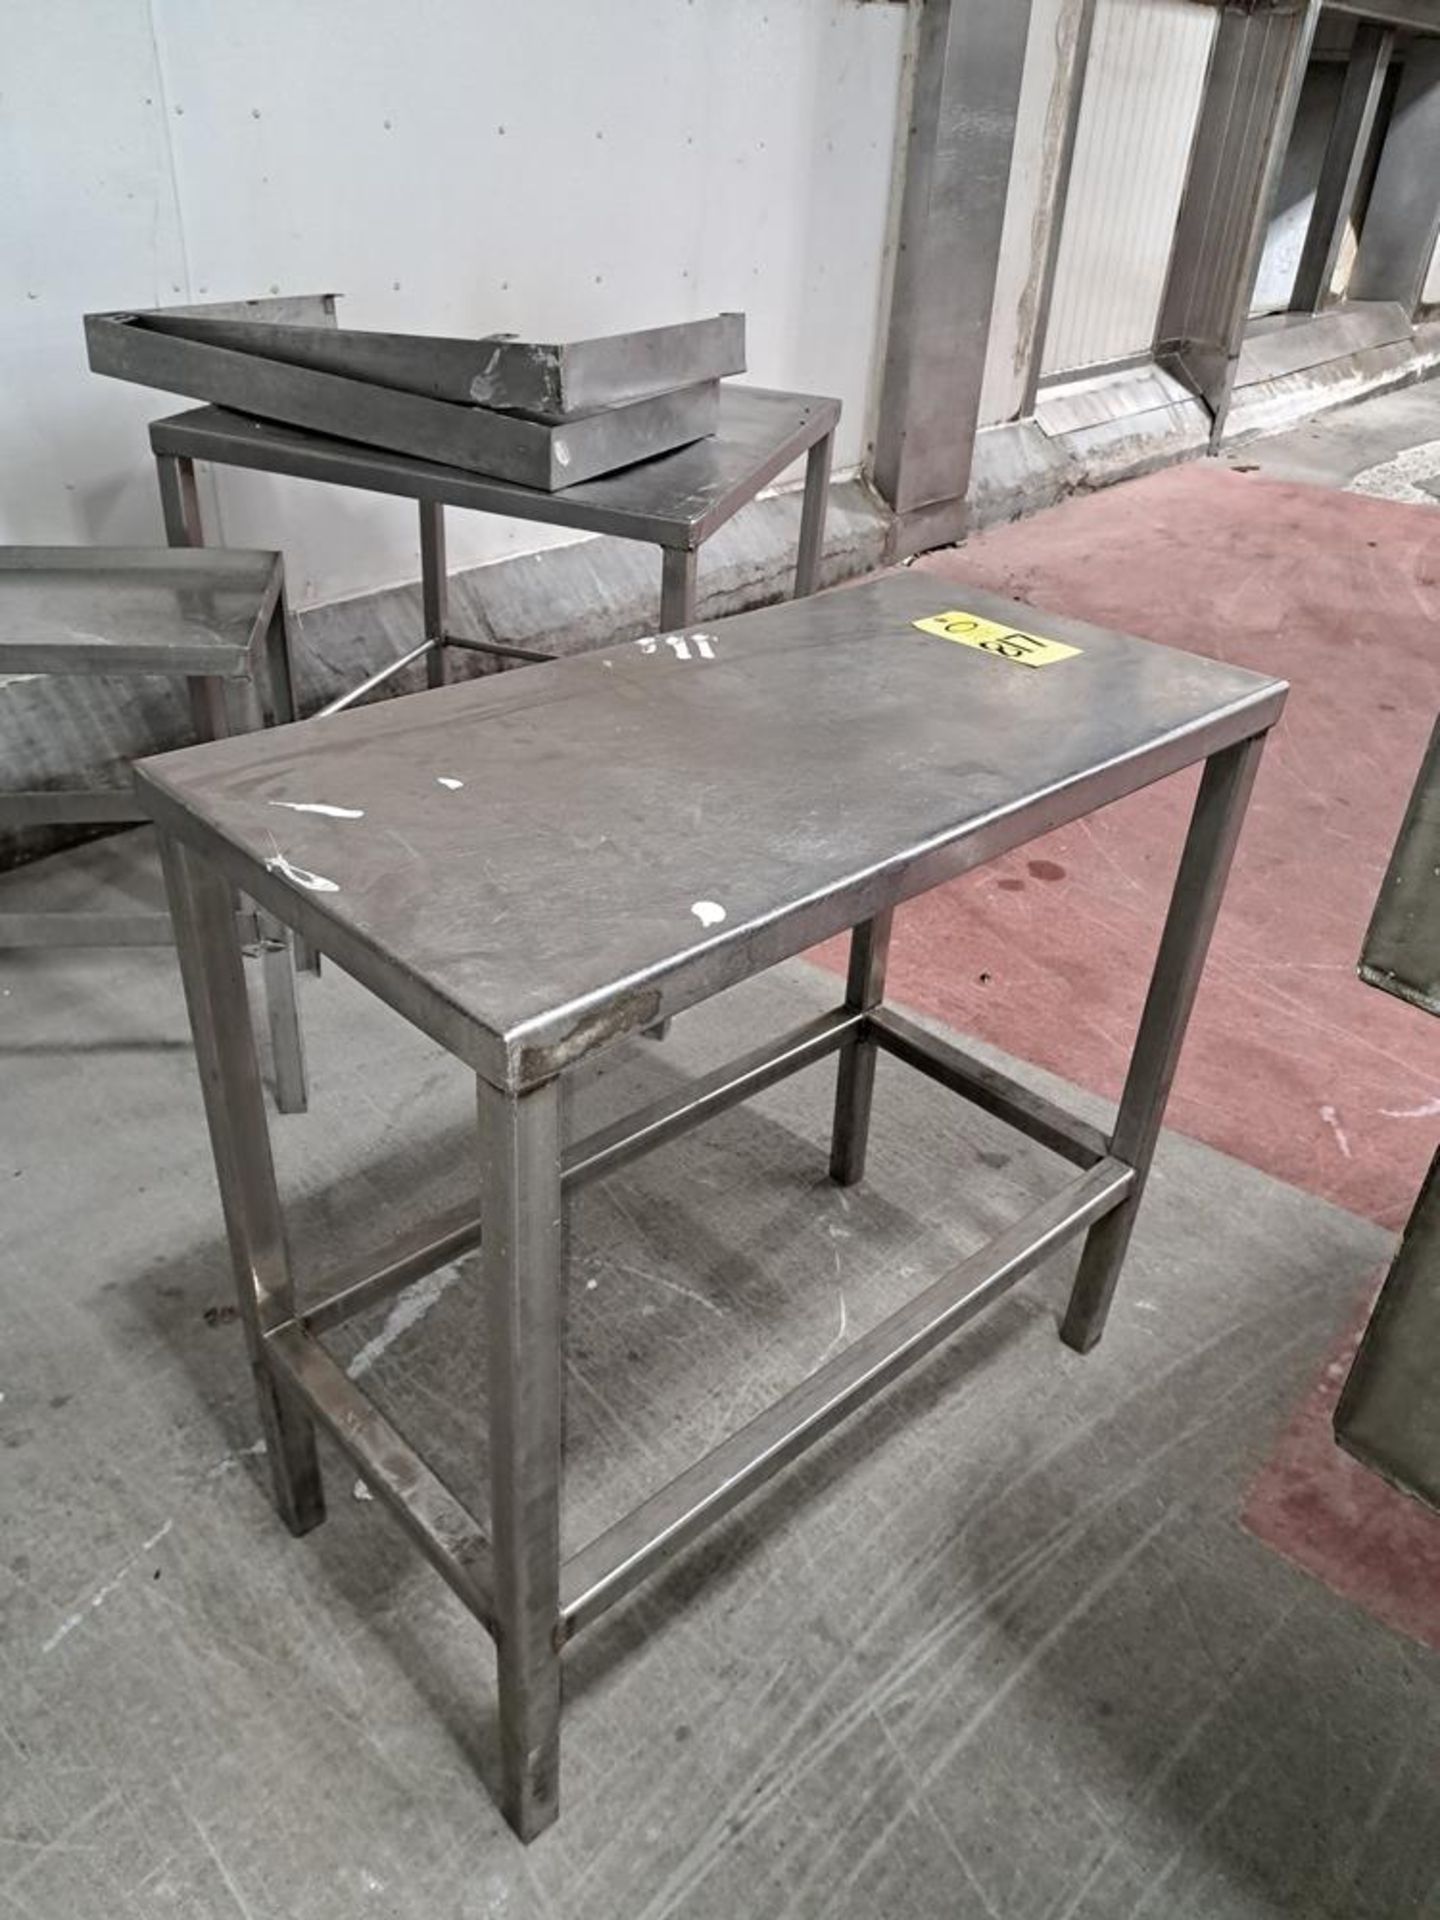 Lot Stainless Steel Meat Wash, (3) Stainless Steel Tables: Required Loading Fee $200.00, Rigger-Norm - Image 3 of 7